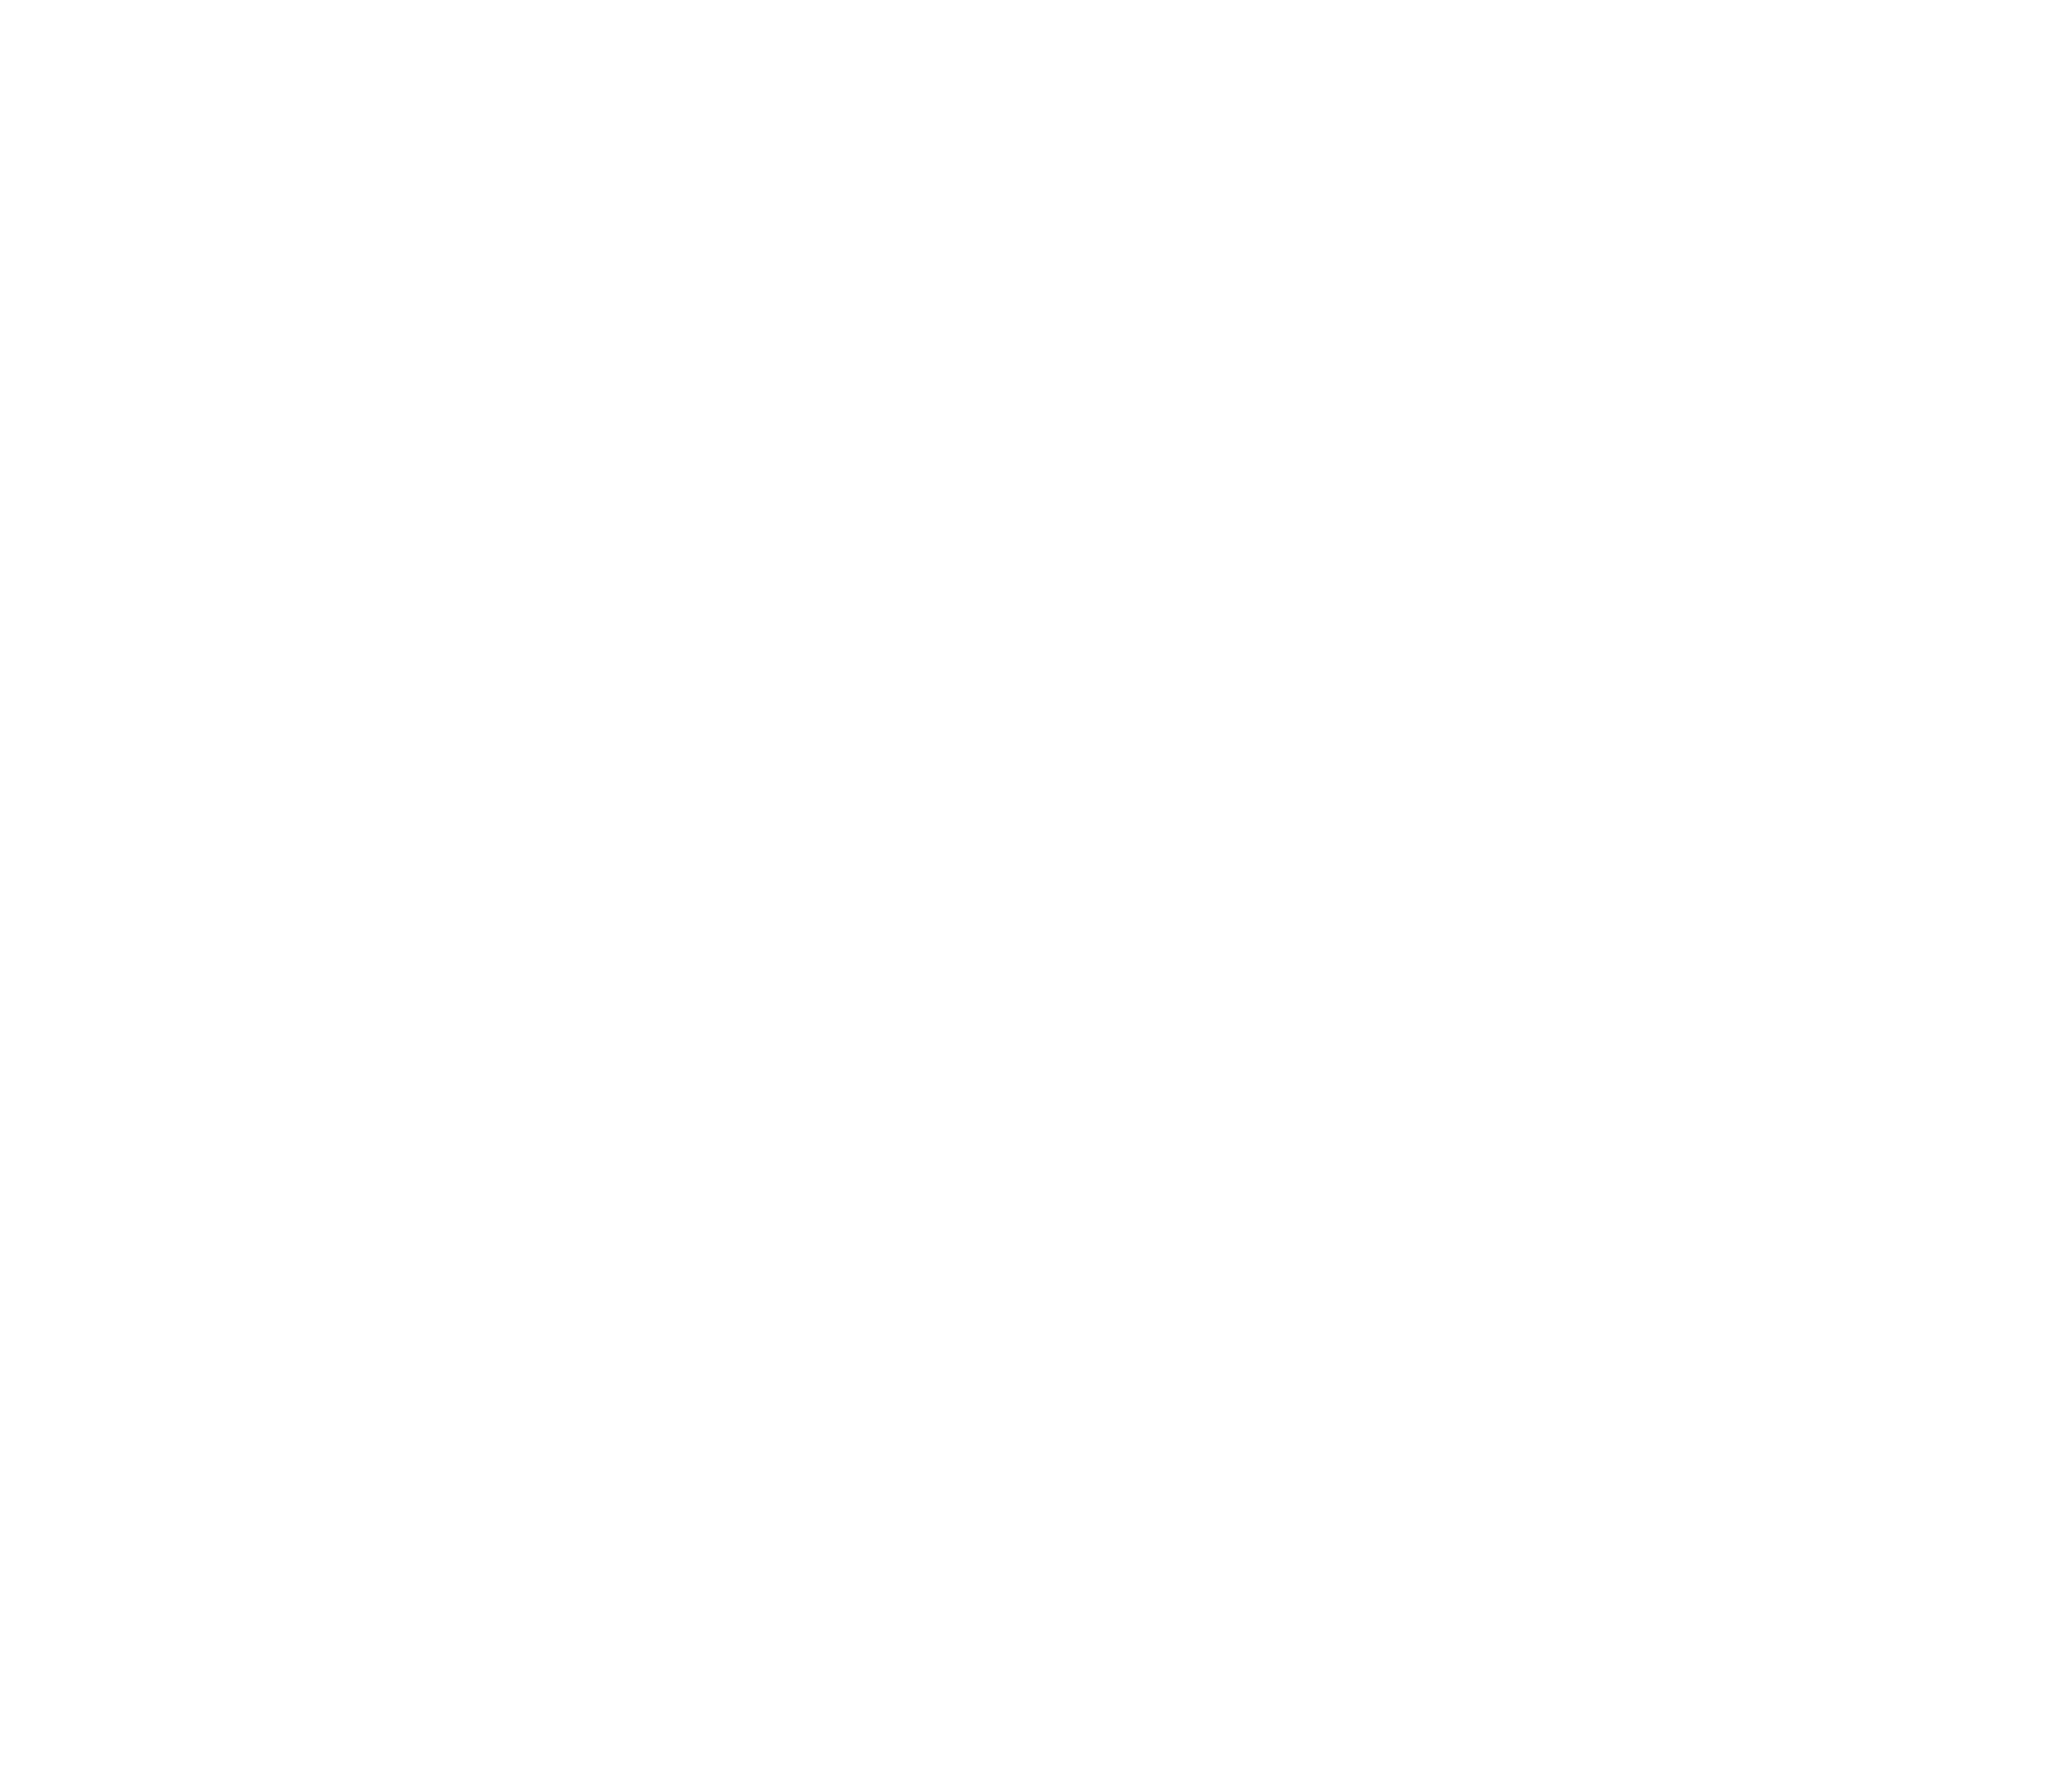 https://www.reslogproject.org/wp-content/uploads/2022/08/leb2-01.png